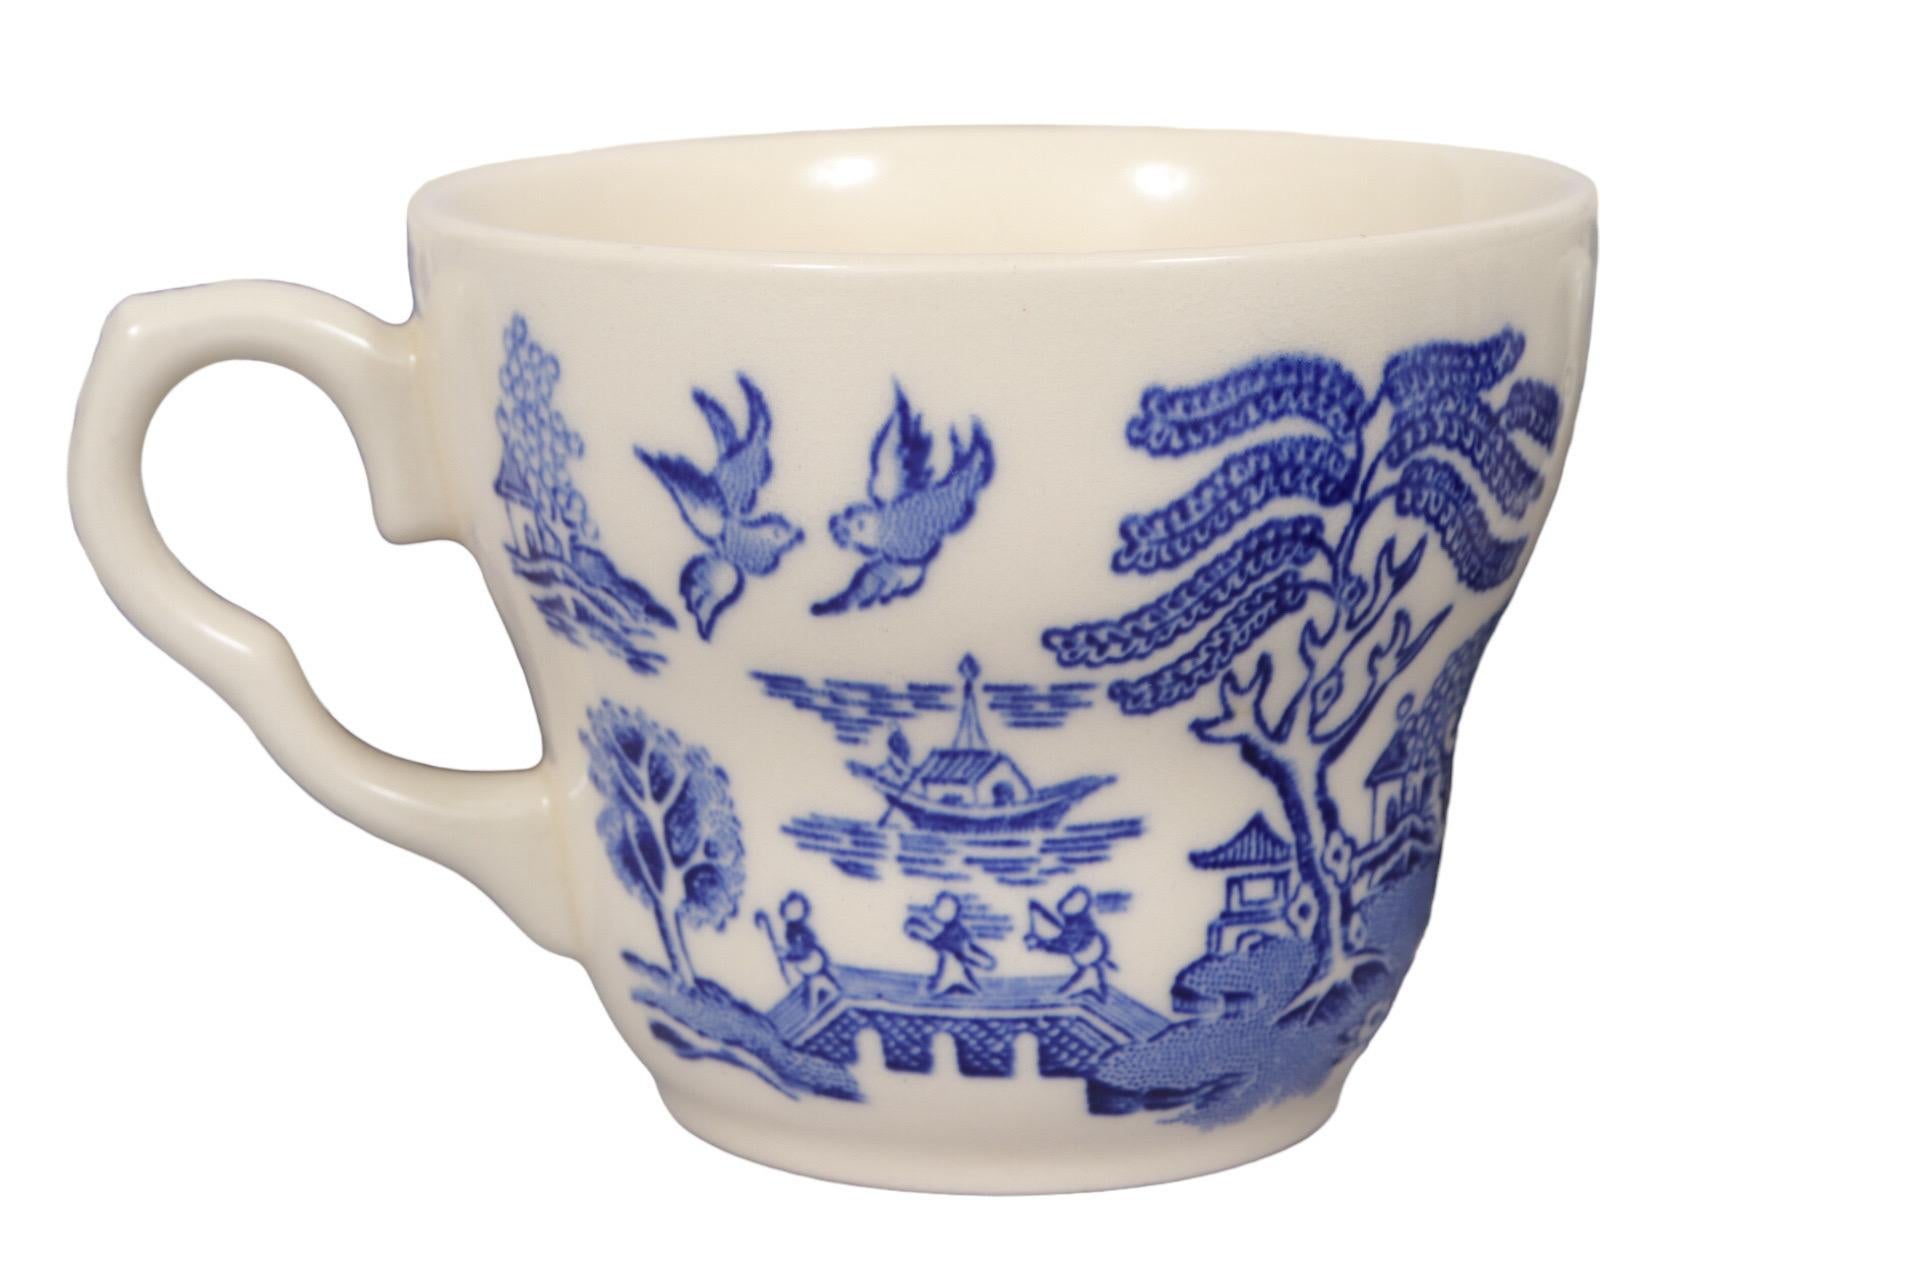 Blue Willow English Tea Cups, Set of 8 In Good Condition For Sale In Bradenton, FL